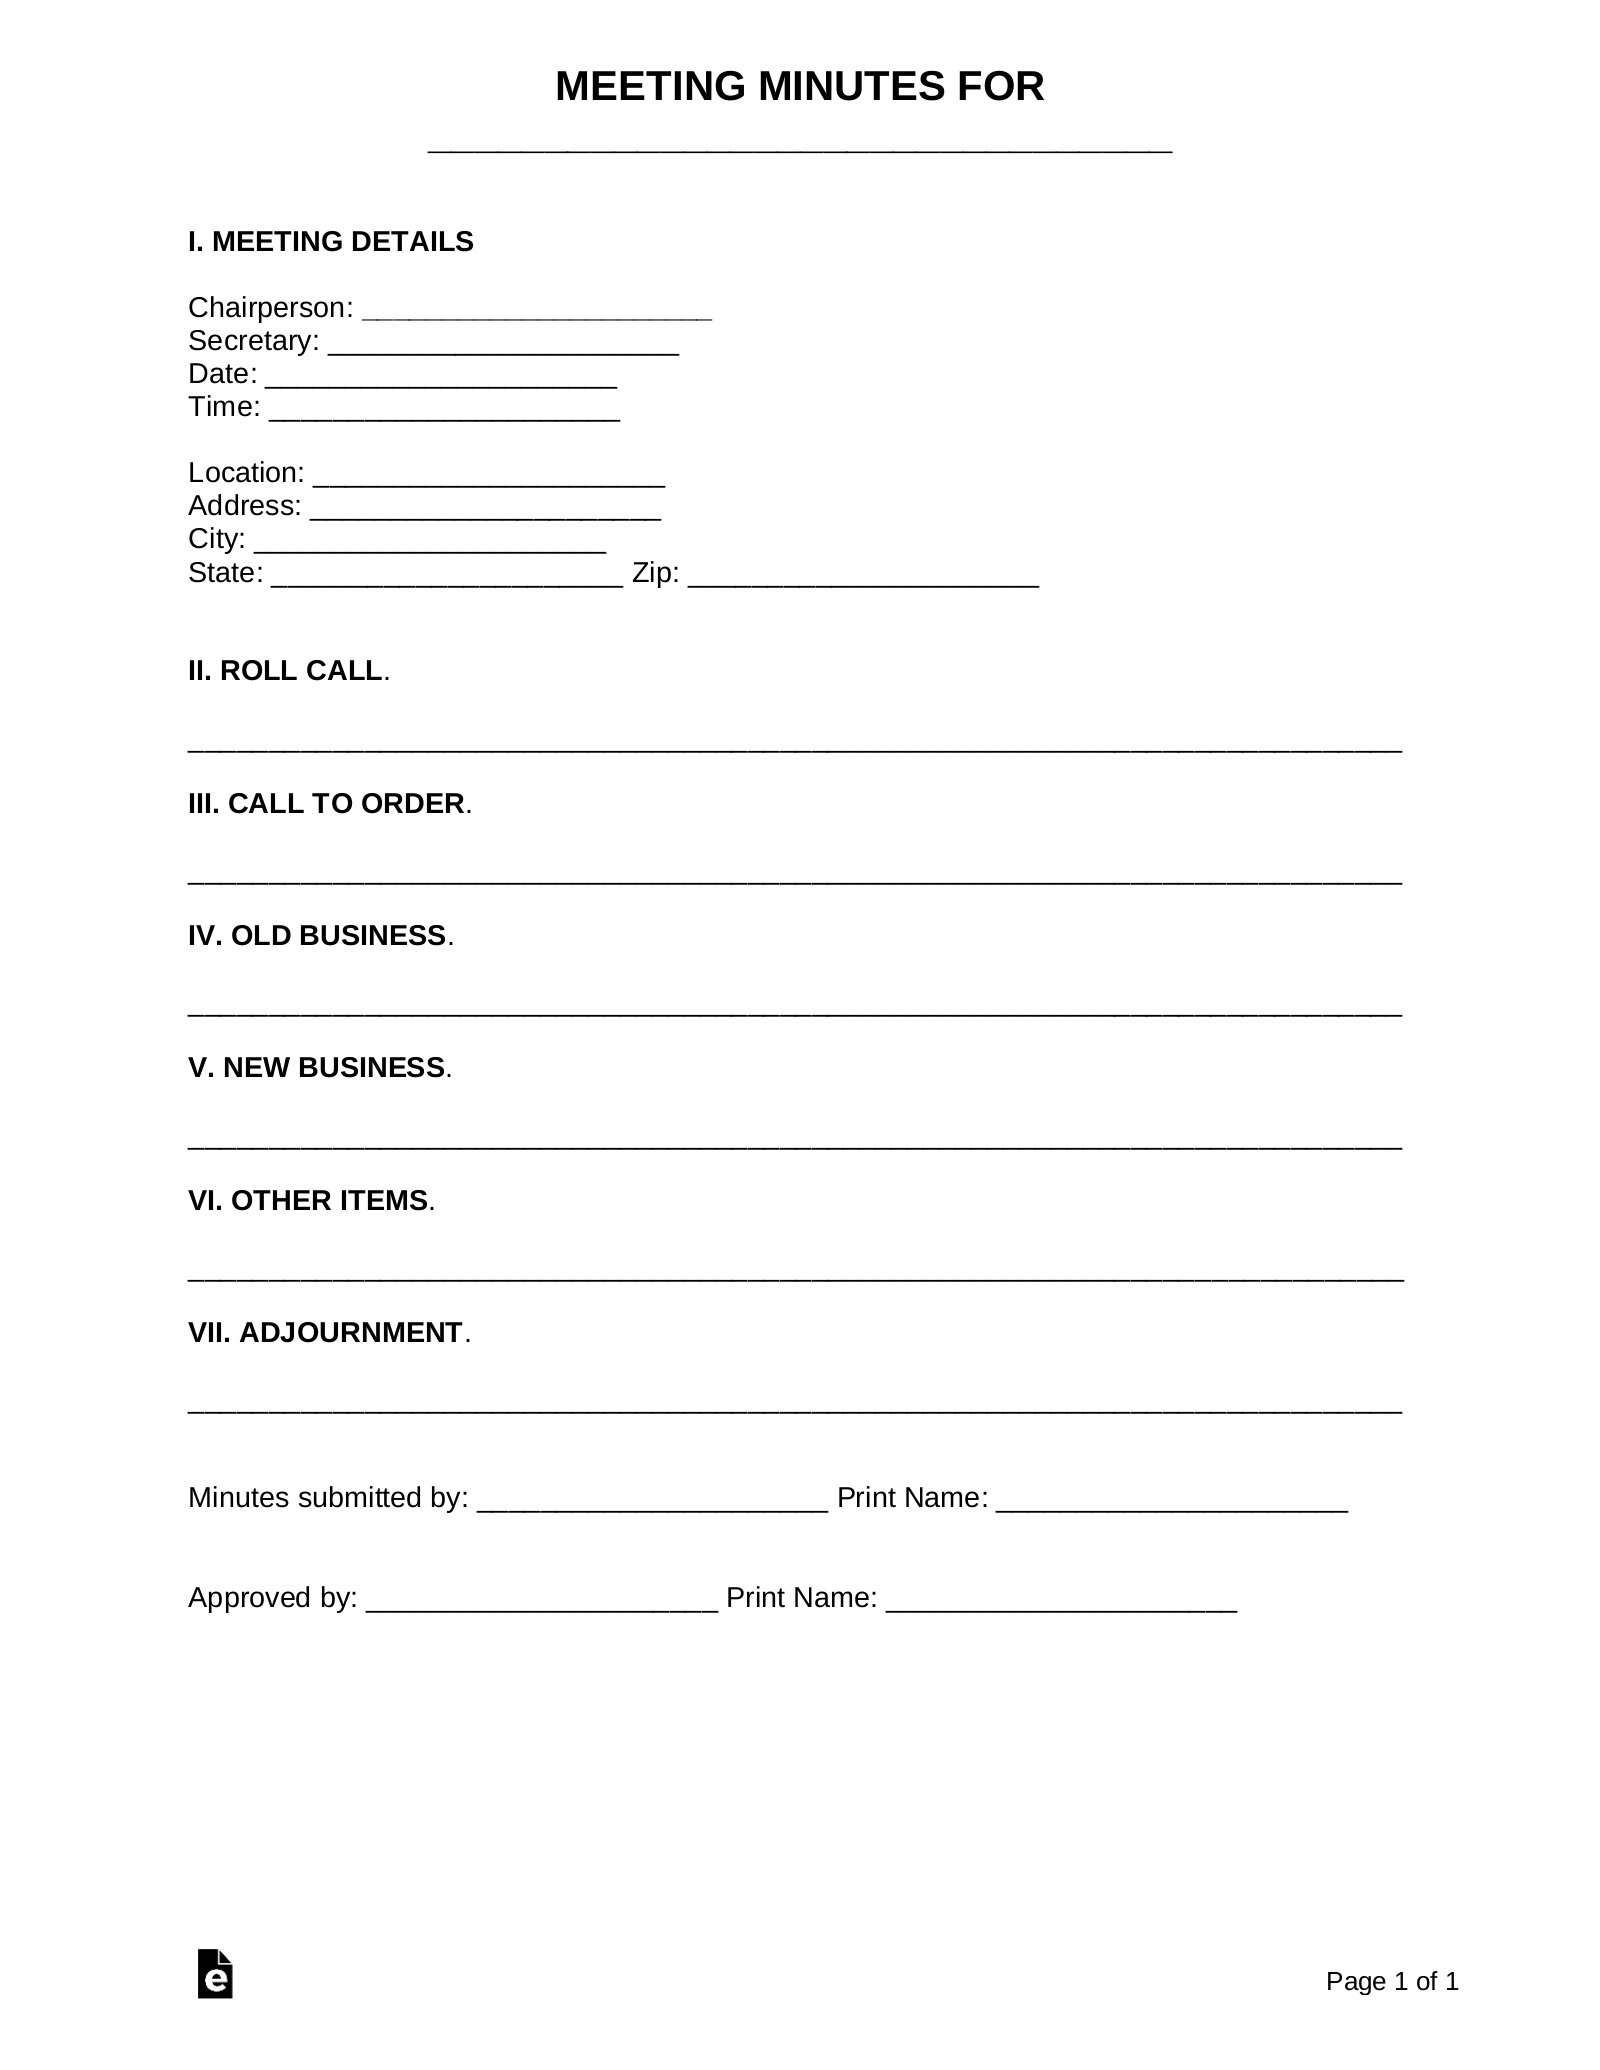 free-1-page-meeting-minutes-template-sample-pdf-word-eforms